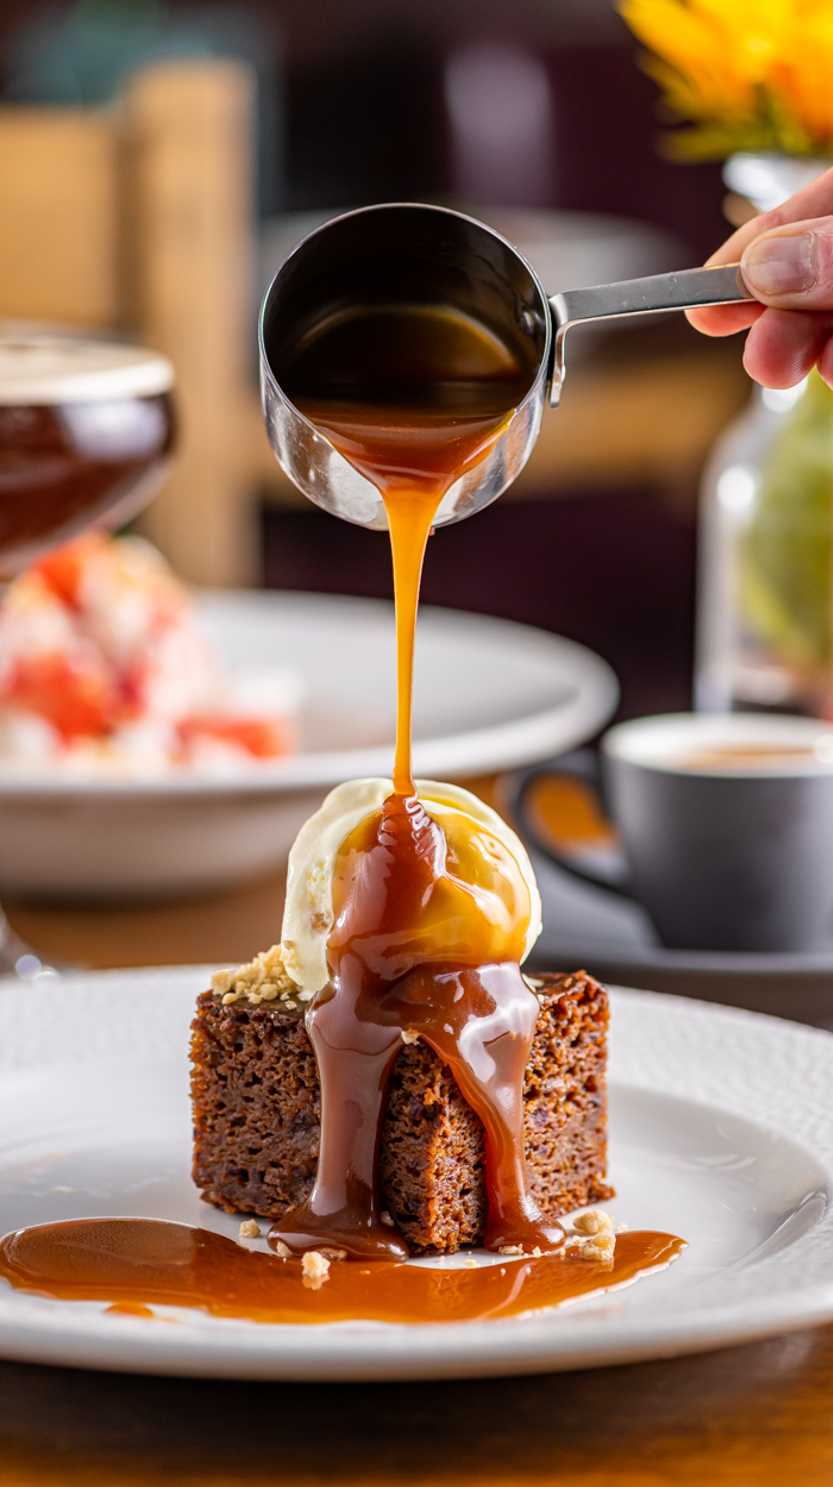 A little pan of sticky toffee sauce is being poured over a dessert.